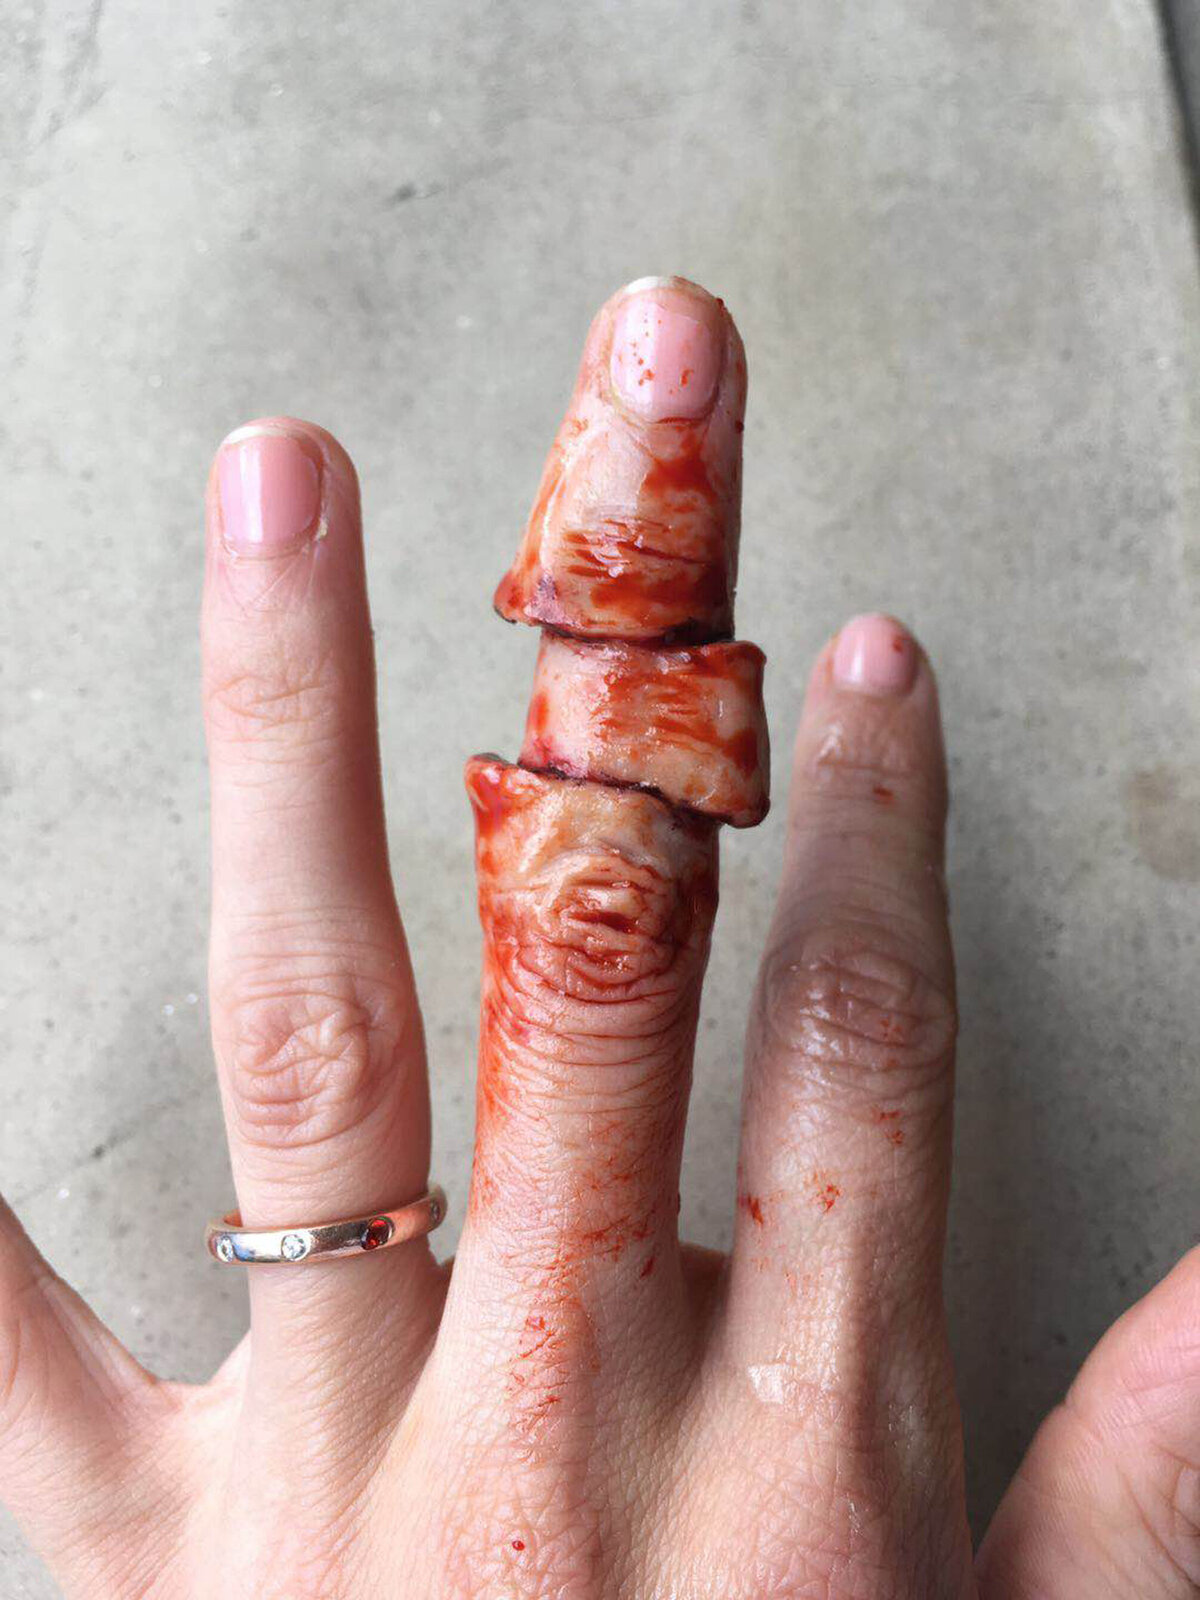 Special effects - severed finger